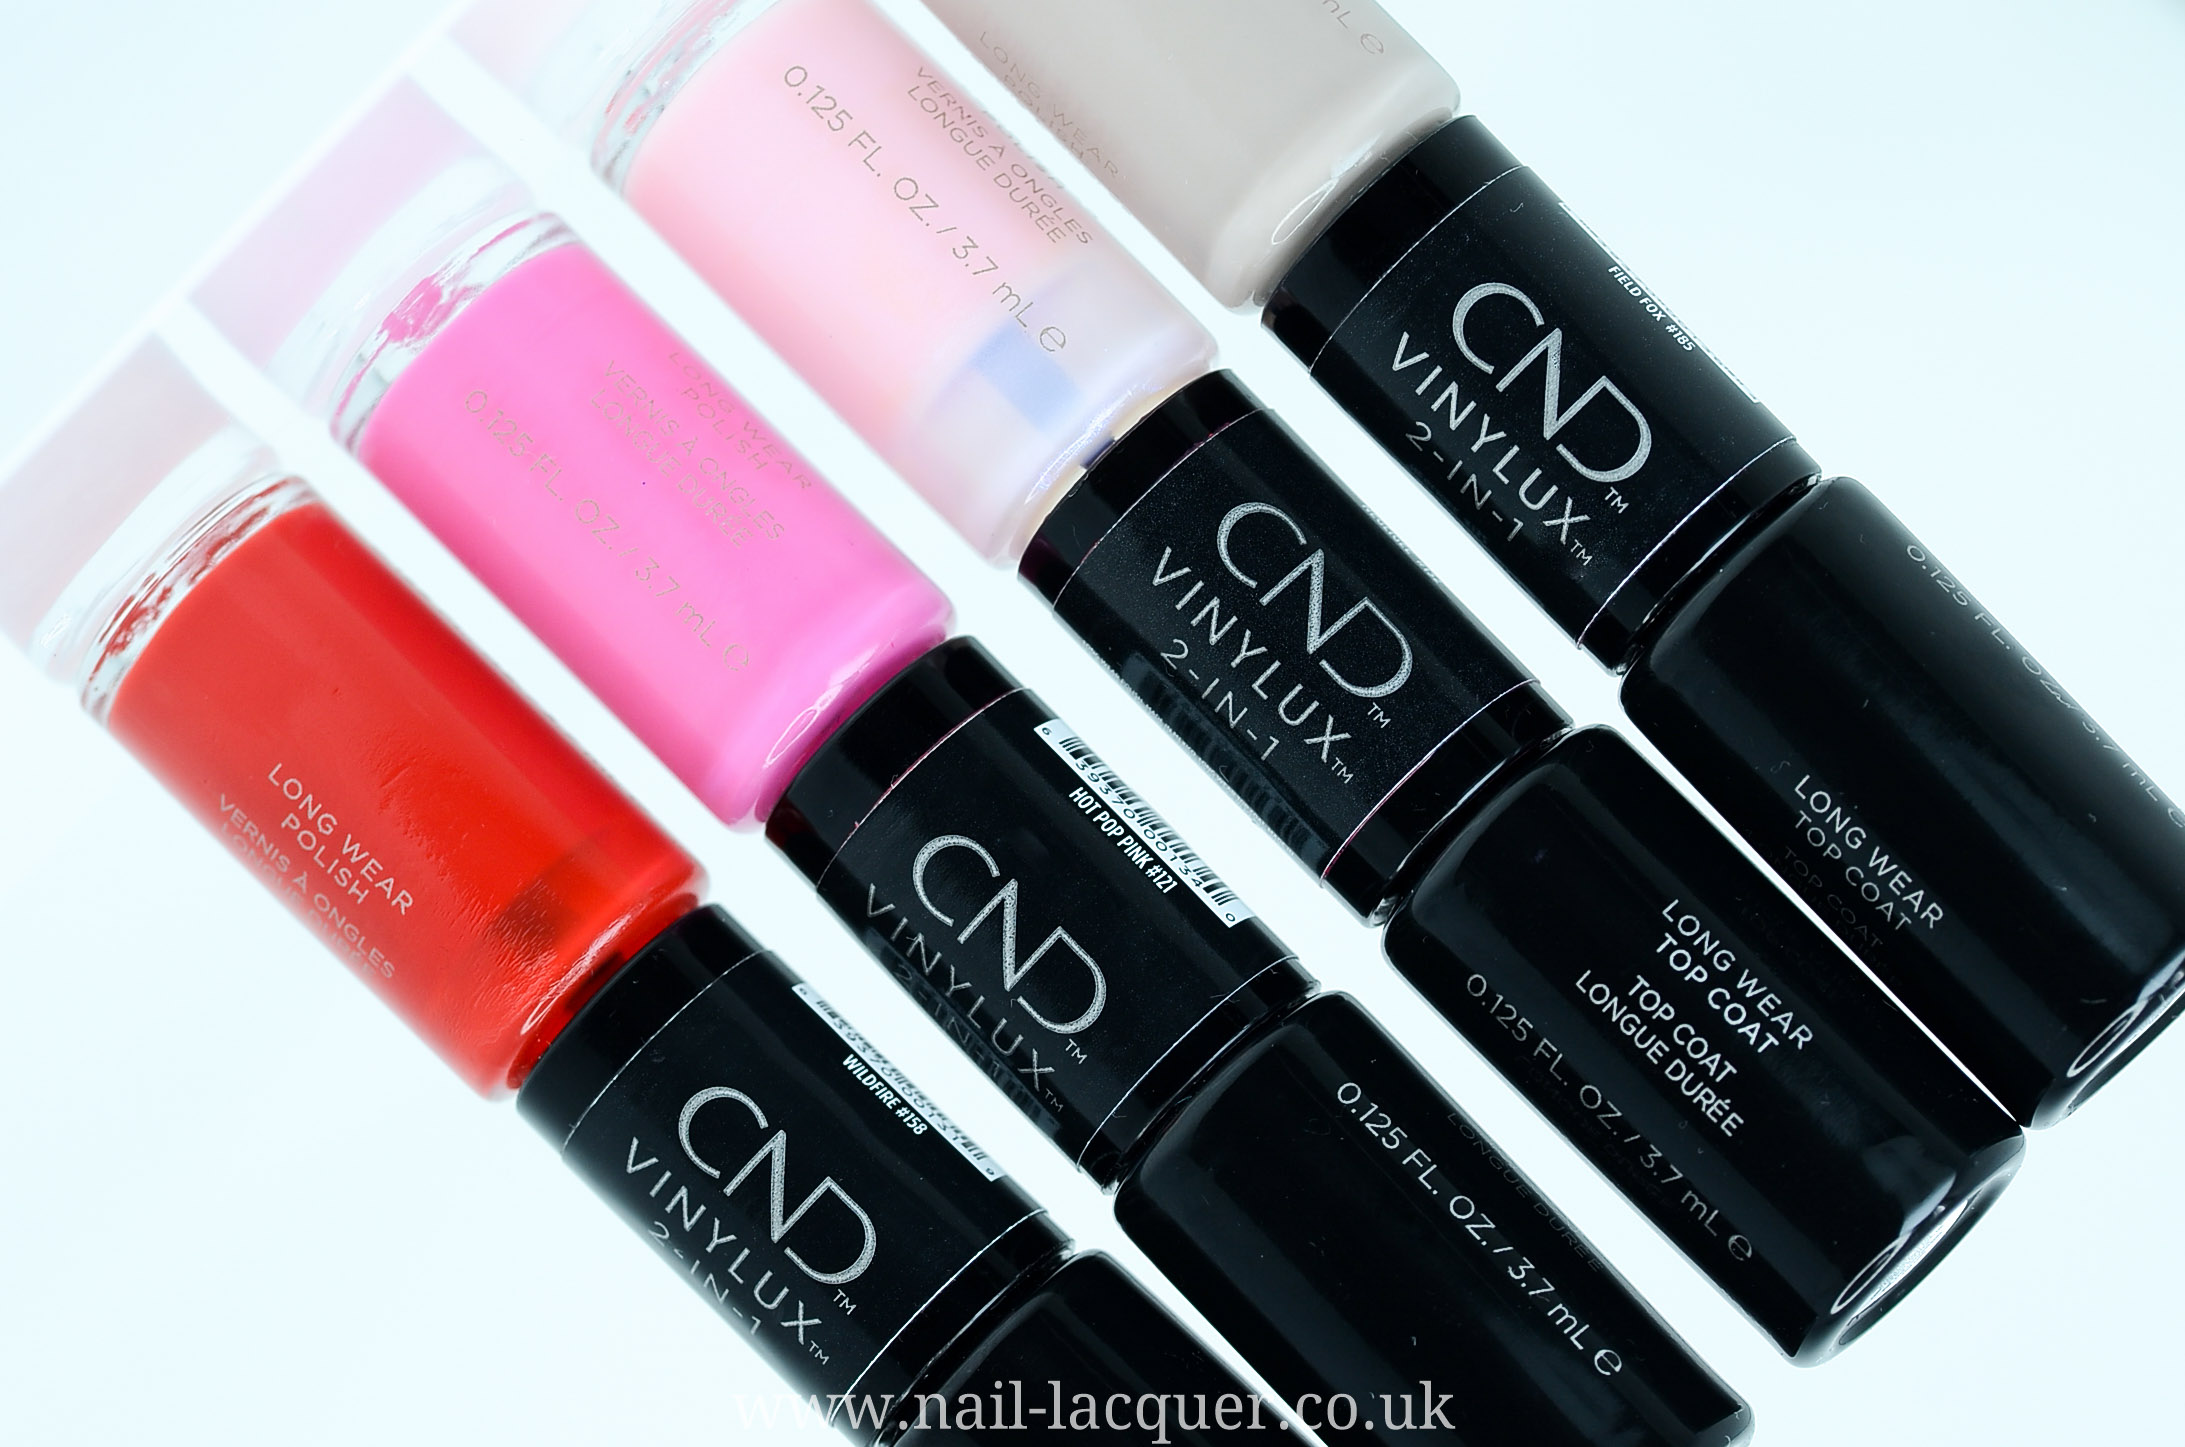 7. CND Vinylux Long Wear Nail Polish - Spring Collection - wide 7